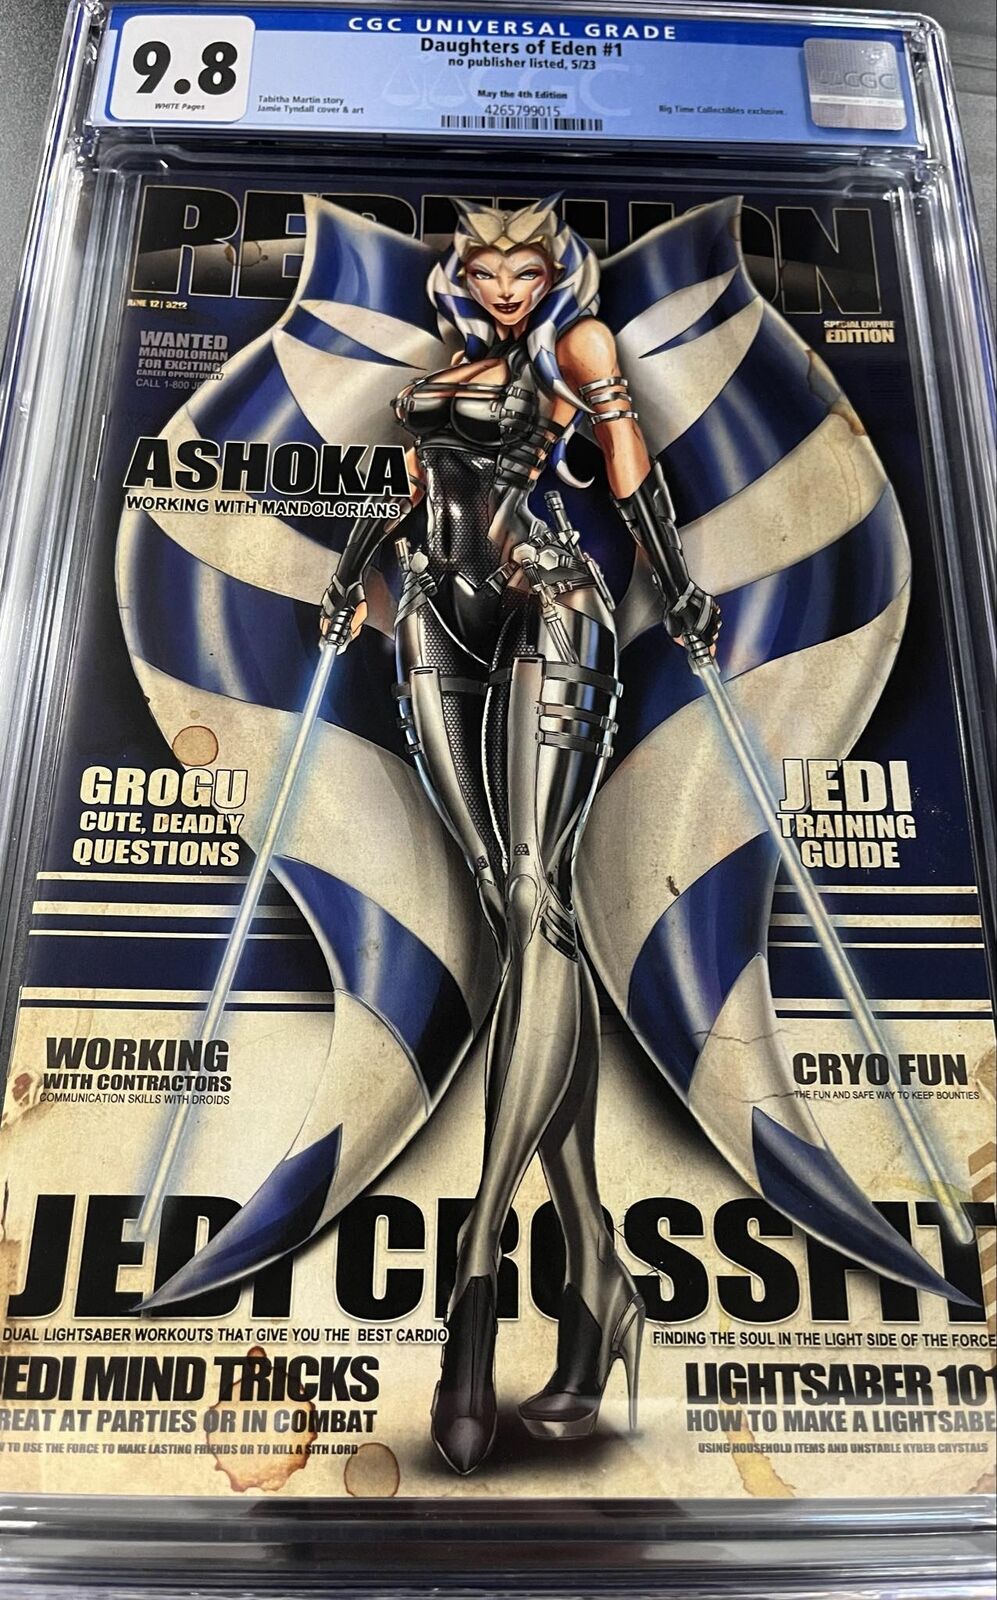 CGC 9.8 Daughters of Eden #1 May the 4th Edition Ahsoka Big Time Collectibles